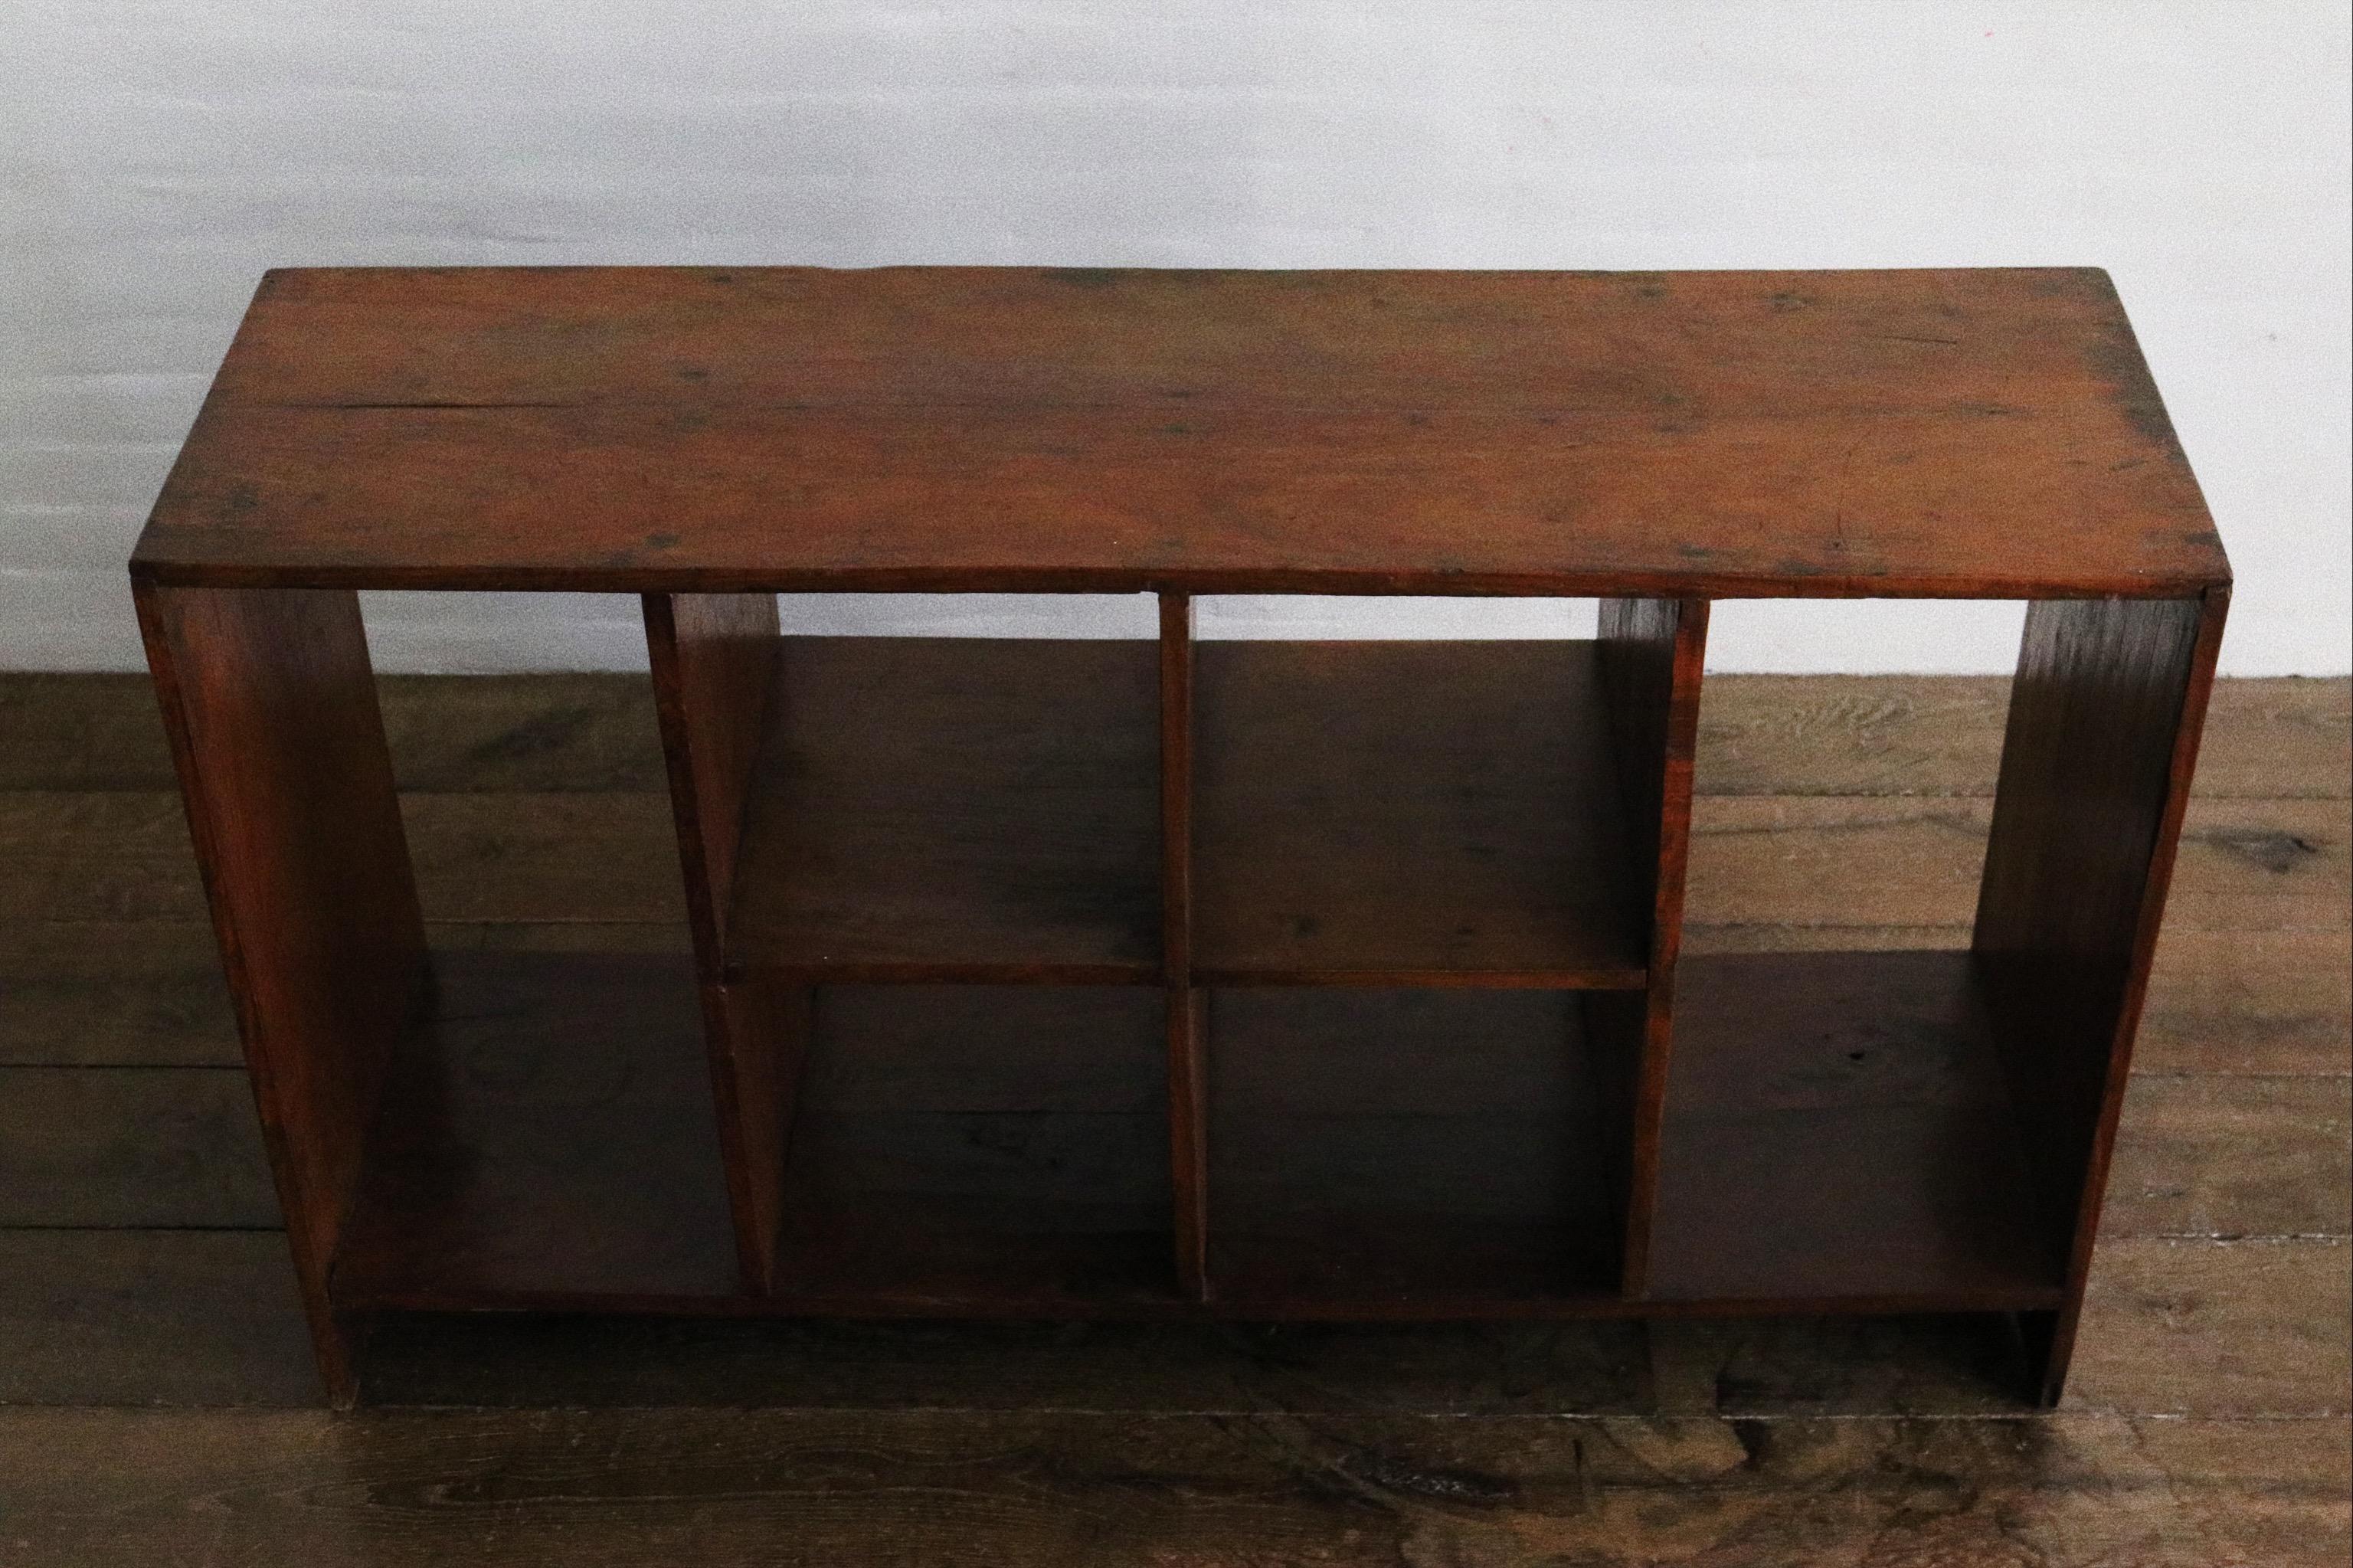 Mid-20th Century Pierre Jeanneret File Rack '1955' with Original Stencil Marks D.I.H.2